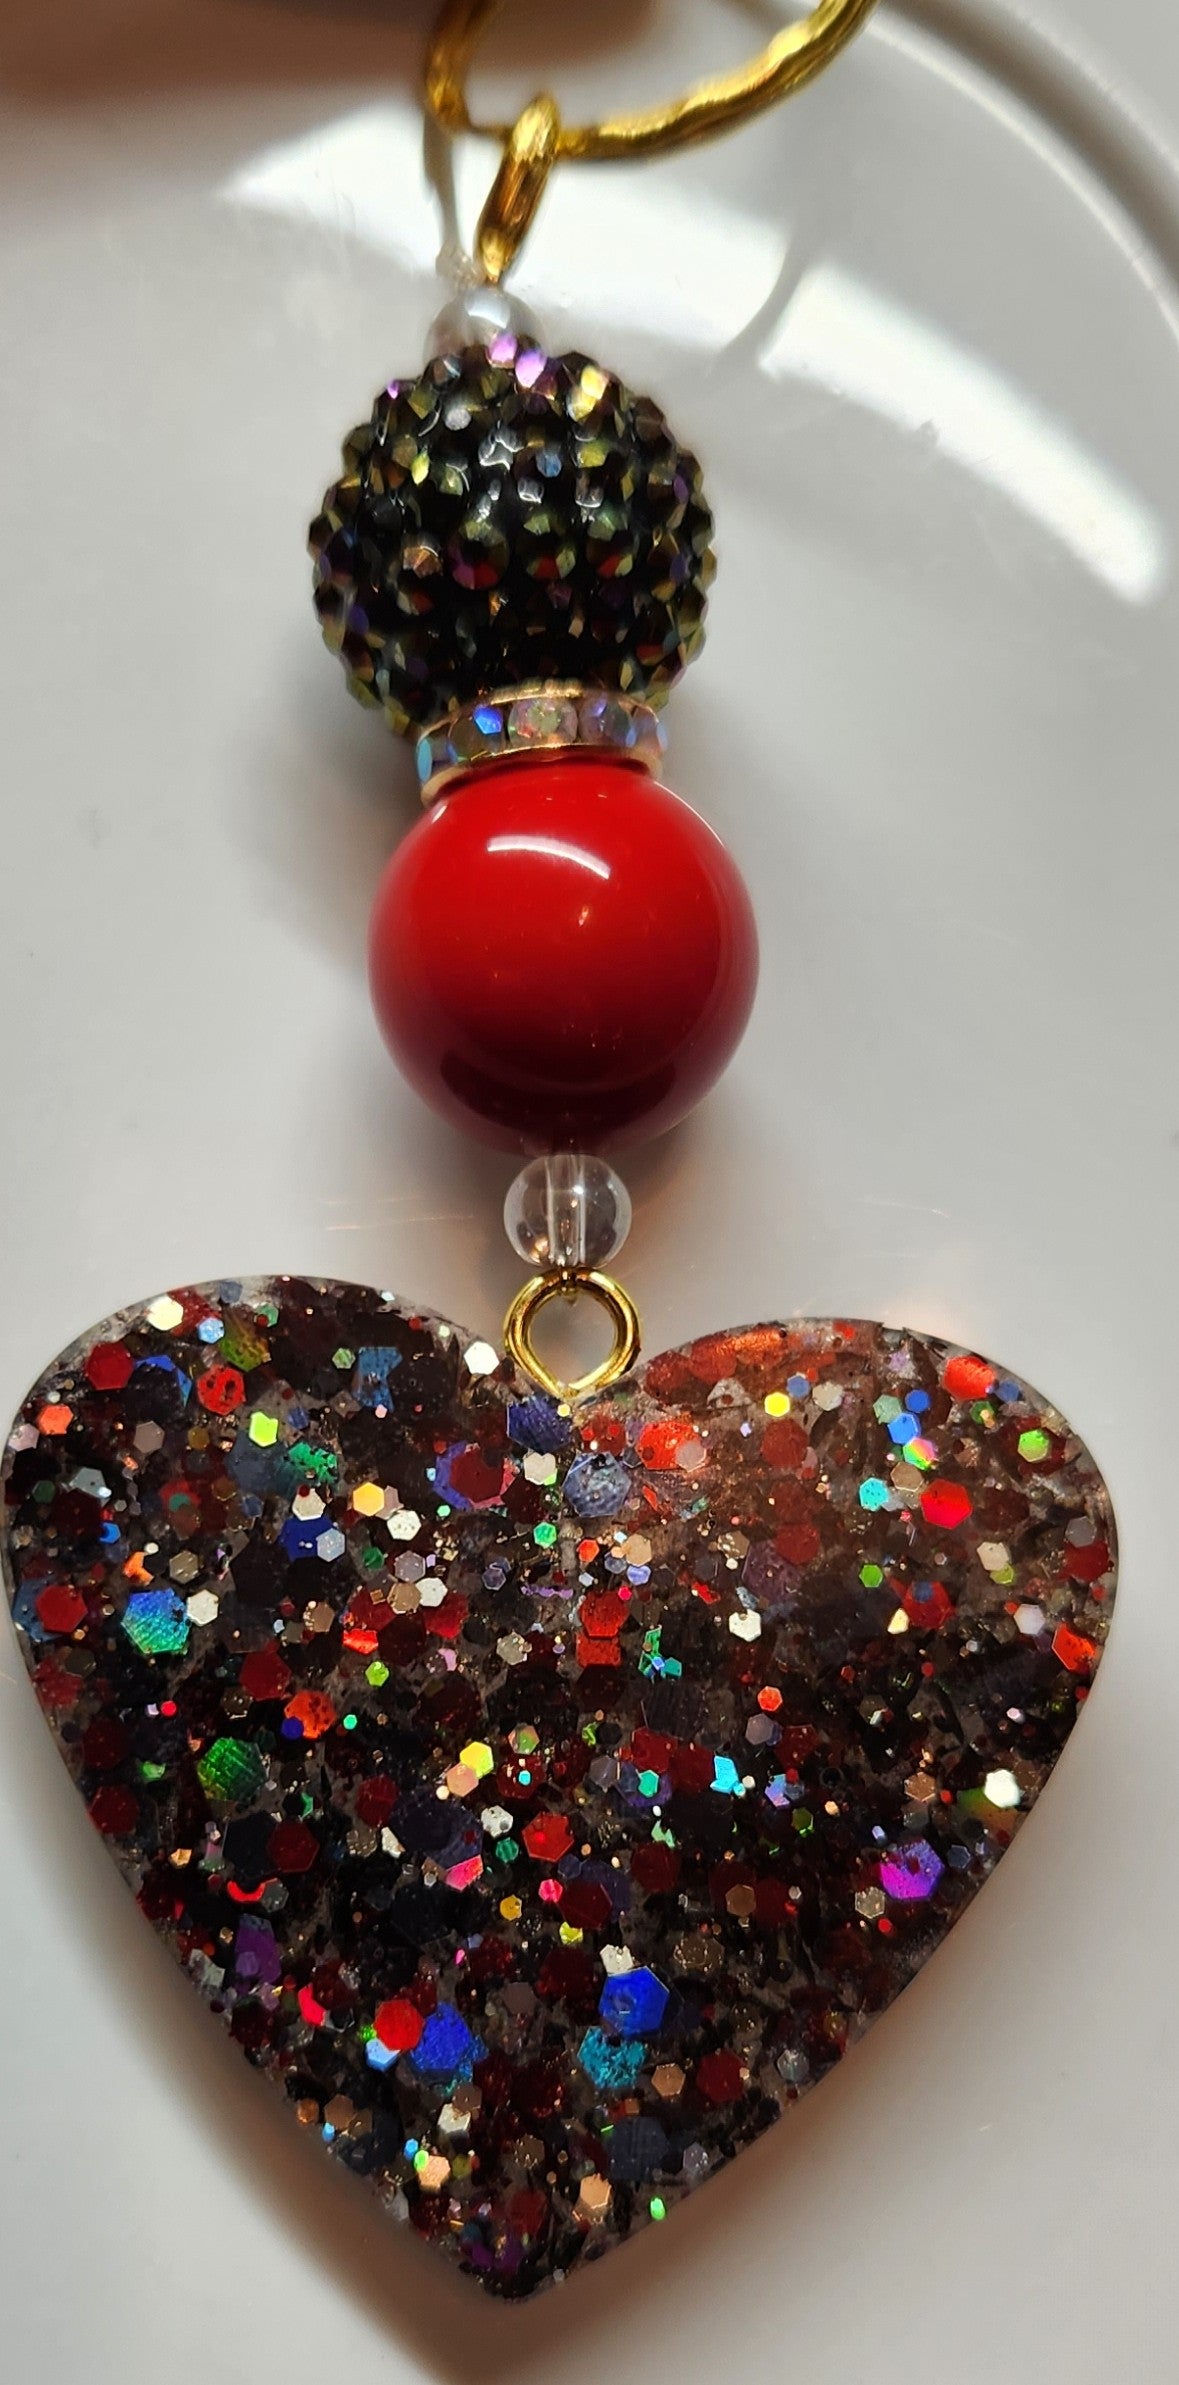 Red and black heart keychain